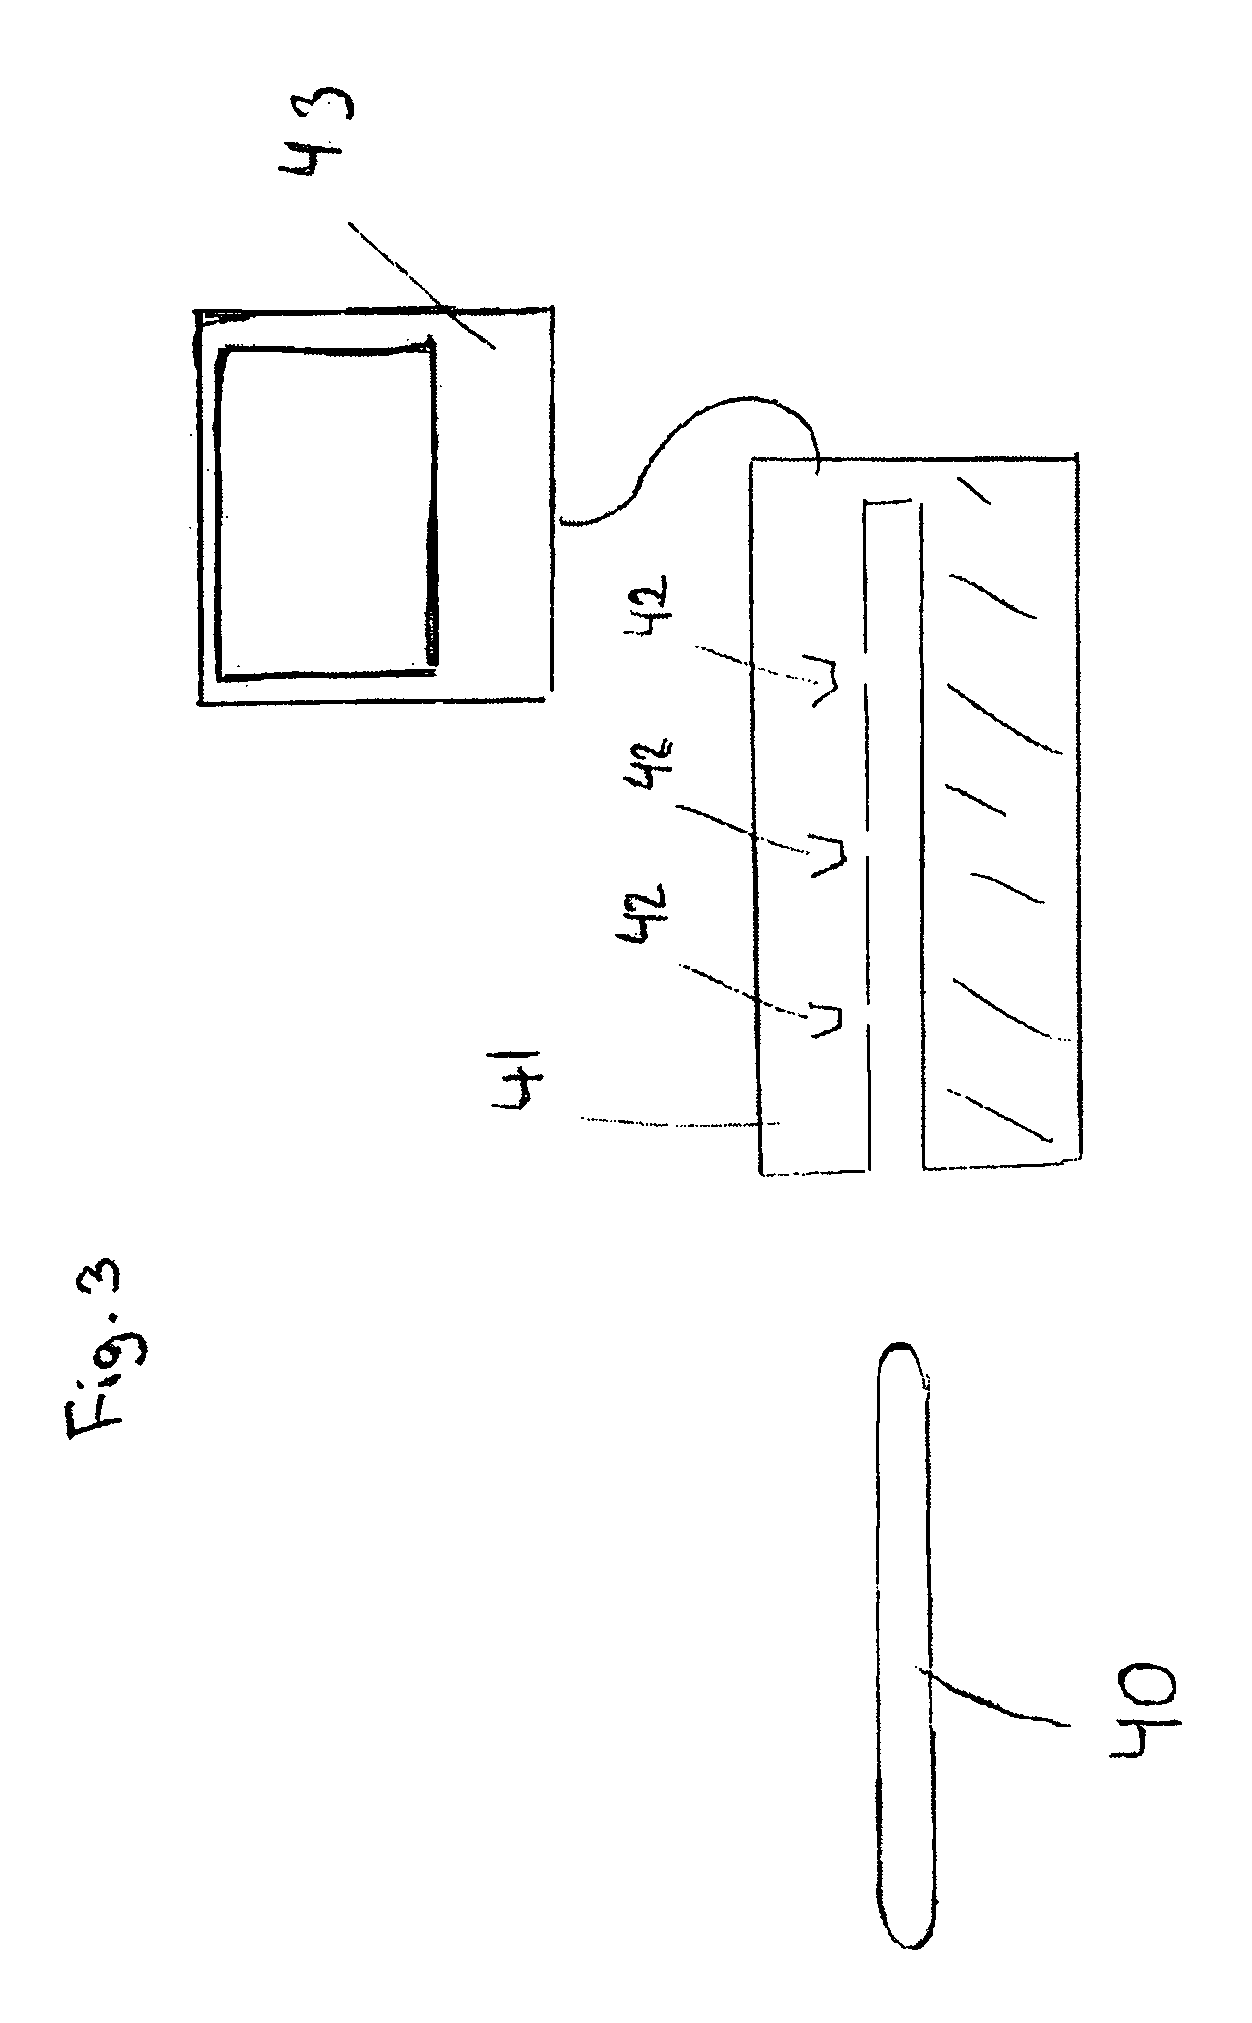 Flow through system, flow through device and a method of performing a test